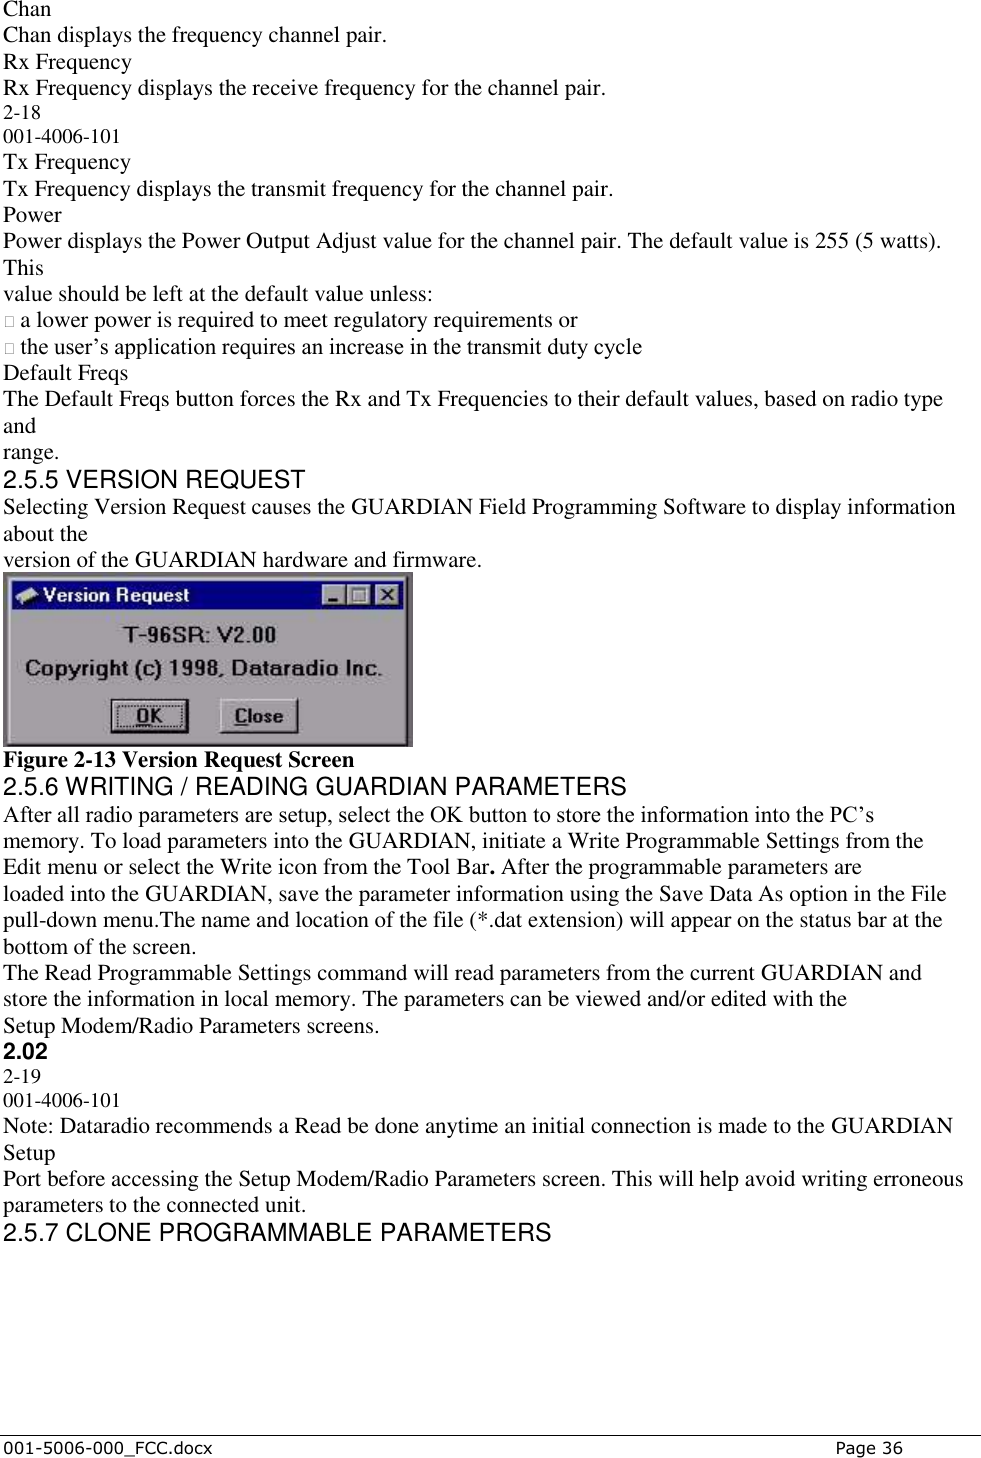  001-5006-000_FCC.docx    Page 36 Chan Chan displays the frequency channel pair. Rx Frequency Rx Frequency displays the receive frequency for the channel pair. 2-18 001-4006-101 Tx Frequency Tx Frequency displays the transmit frequency for the channel pair. Power Power displays the Power Output Adjust value for the channel pair. The default value is 255 (5 watts). This value should be left at the default value unless: � a lower power is required to meet regulatory requirements or � the user‟s application requires an increase in the transmit duty cycle Default Freqs The Default Freqs button forces the Rx and Tx Frequencies to their default values, based on radio type and range. 2.5.5 VERSION REQUEST Selecting Version Request causes the GUARDIAN Field Programming Software to display information about the version of the GUARDIAN hardware and firmware.  Figure 2-13 Version Request Screen 2.5.6 WRITING / READING GUARDIAN PARAMETERS After all radio parameters are setup, select the OK button to store the information into the PC‟s memory. To load parameters into the GUARDIAN, initiate a Write Programmable Settings from the Edit menu or select the Write icon from the Tool Bar. After the programmable parameters are loaded into the GUARDIAN, save the parameter information using the Save Data As option in the File pull-down menu.The name and location of the file (*.dat extension) will appear on the status bar at the bottom of the screen. The Read Programmable Settings command will read parameters from the current GUARDIAN and store the information in local memory. The parameters can be viewed and/or edited with the Setup Modem/Radio Parameters screens. 2.02 2-19 001-4006-101 Note: Dataradio recommends a Read be done anytime an initial connection is made to the GUARDIAN Setup Port before accessing the Setup Modem/Radio Parameters screen. This will help avoid writing erroneous parameters to the connected unit. 2.5.7 CLONE PROGRAMMABLE PARAMETERS 